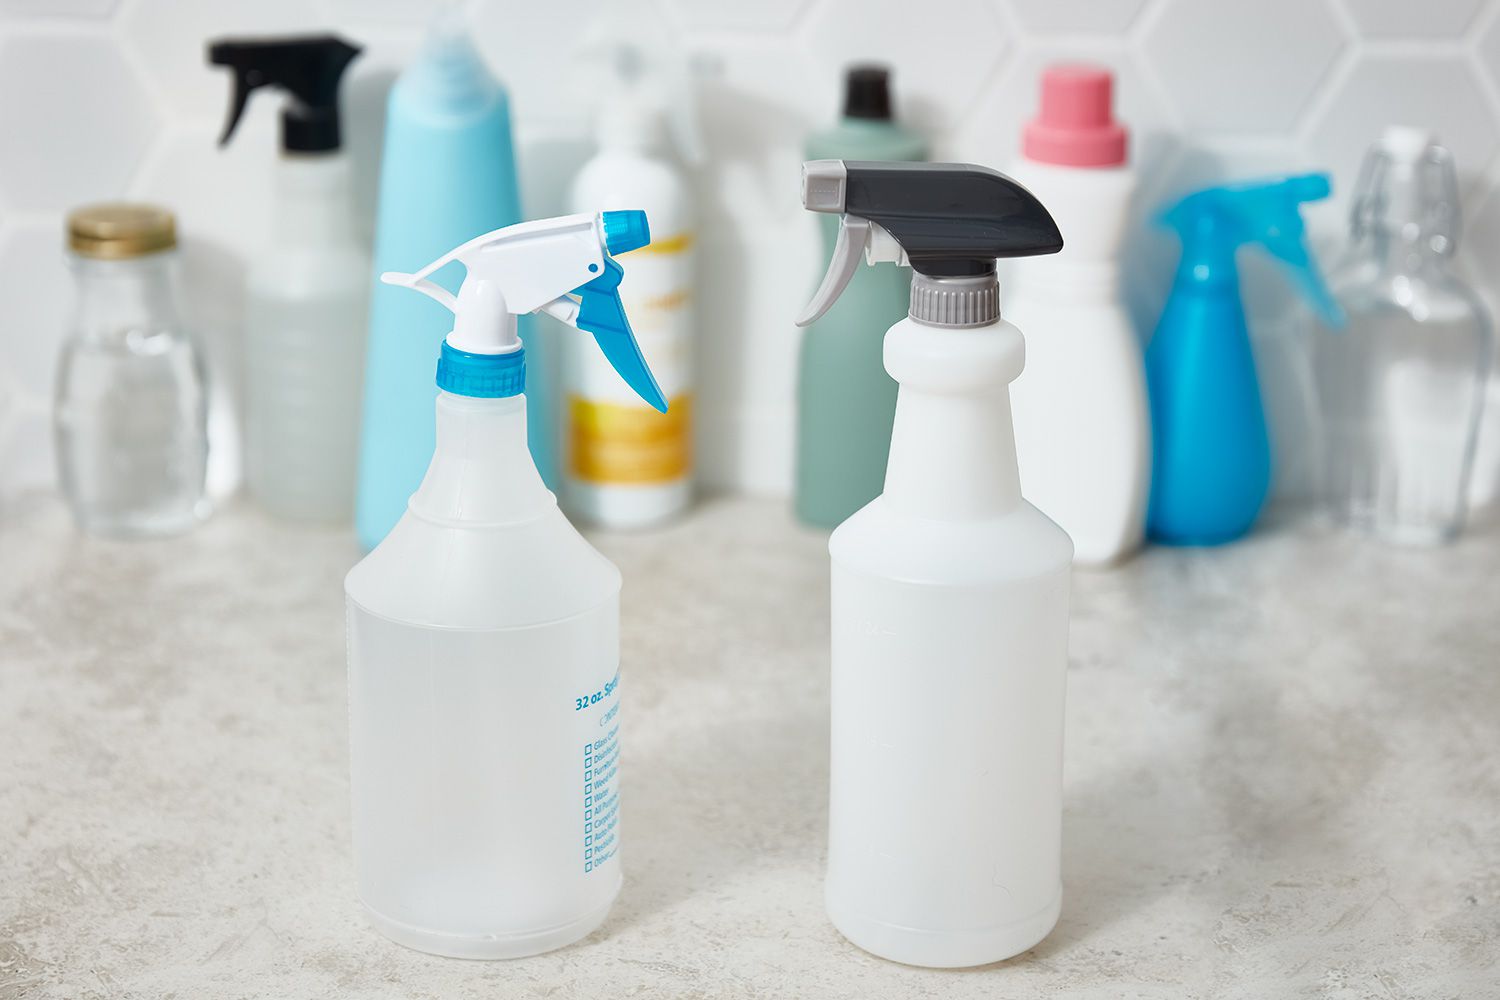 a variety of cleaners, disinfectants, and sanitizers